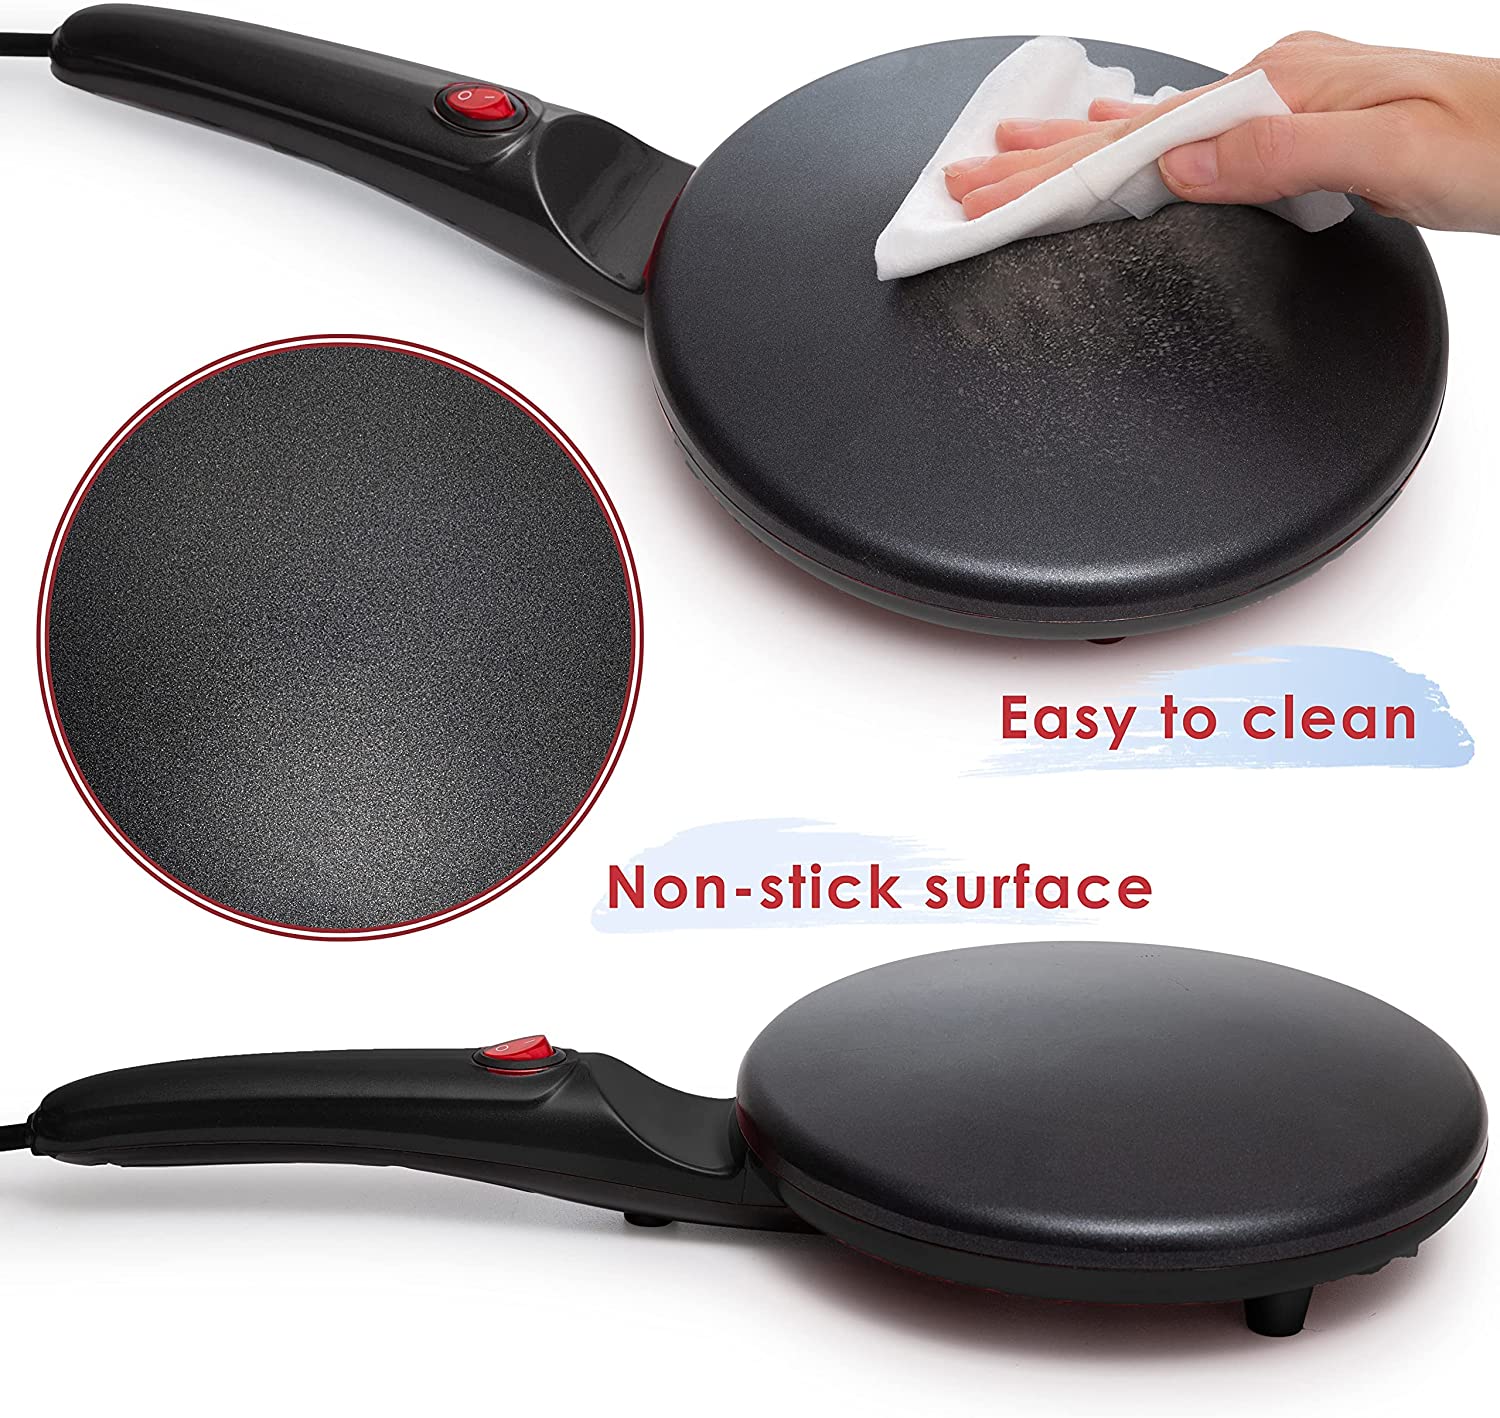 Portable Crepe Maker & Non-Stick Dipping Plate - ZHOFT